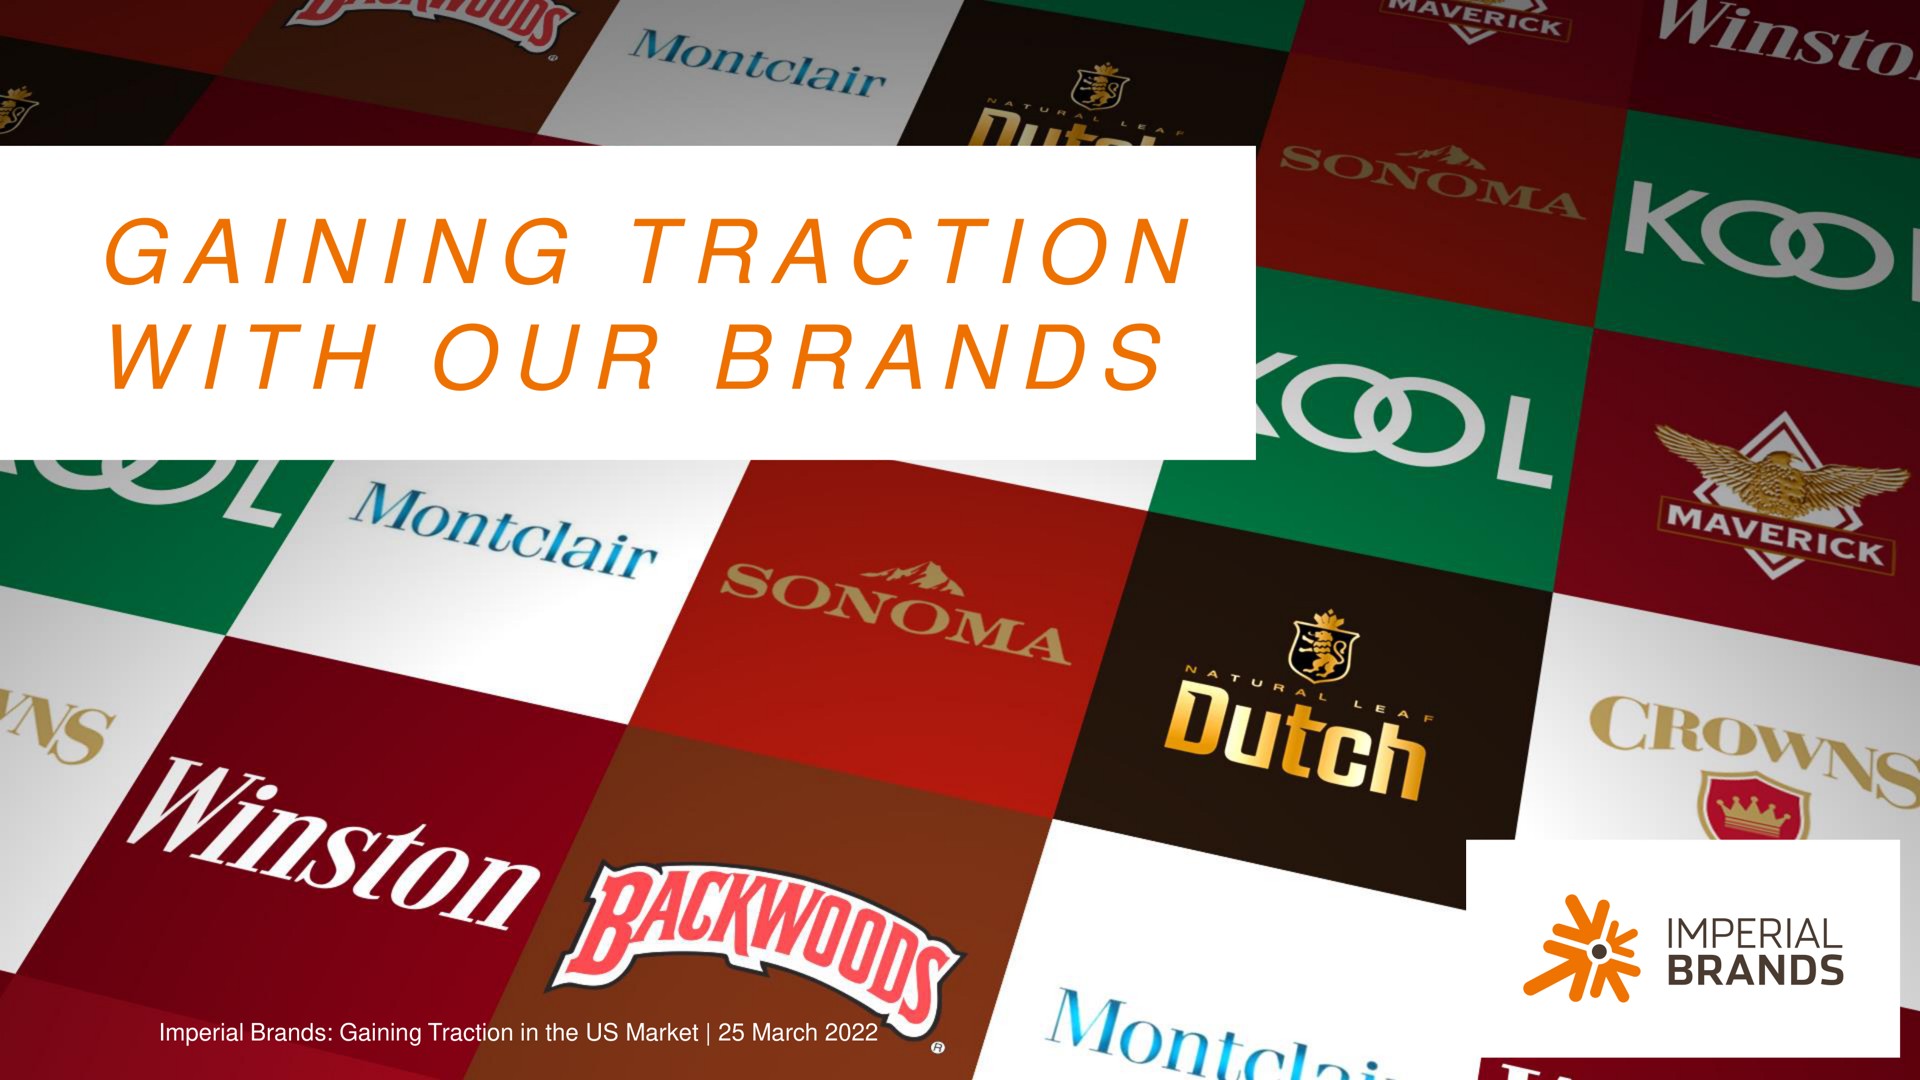 a i i a i i a gaining traction with our brands | Imperial Brands